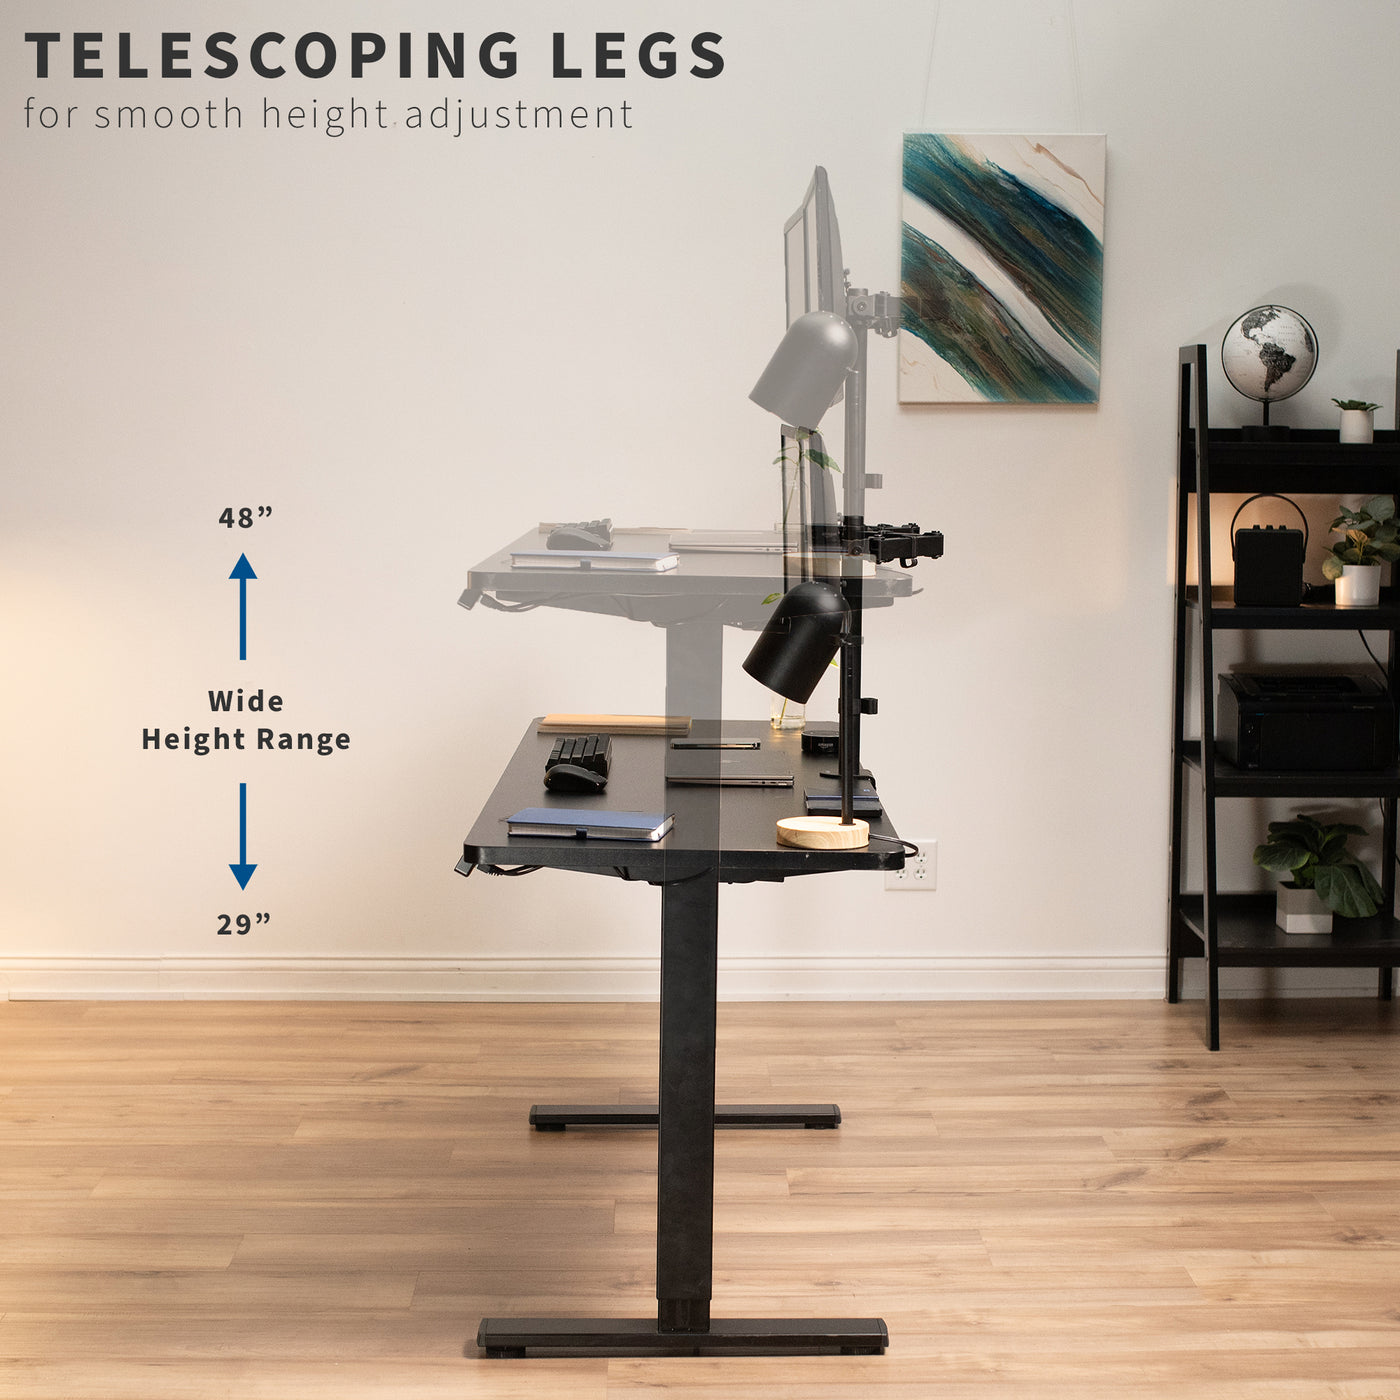 Heavy-duty electric height adjustable desktop workstation for active sit or stand efficient workspace with telescoping legs for solid base support.